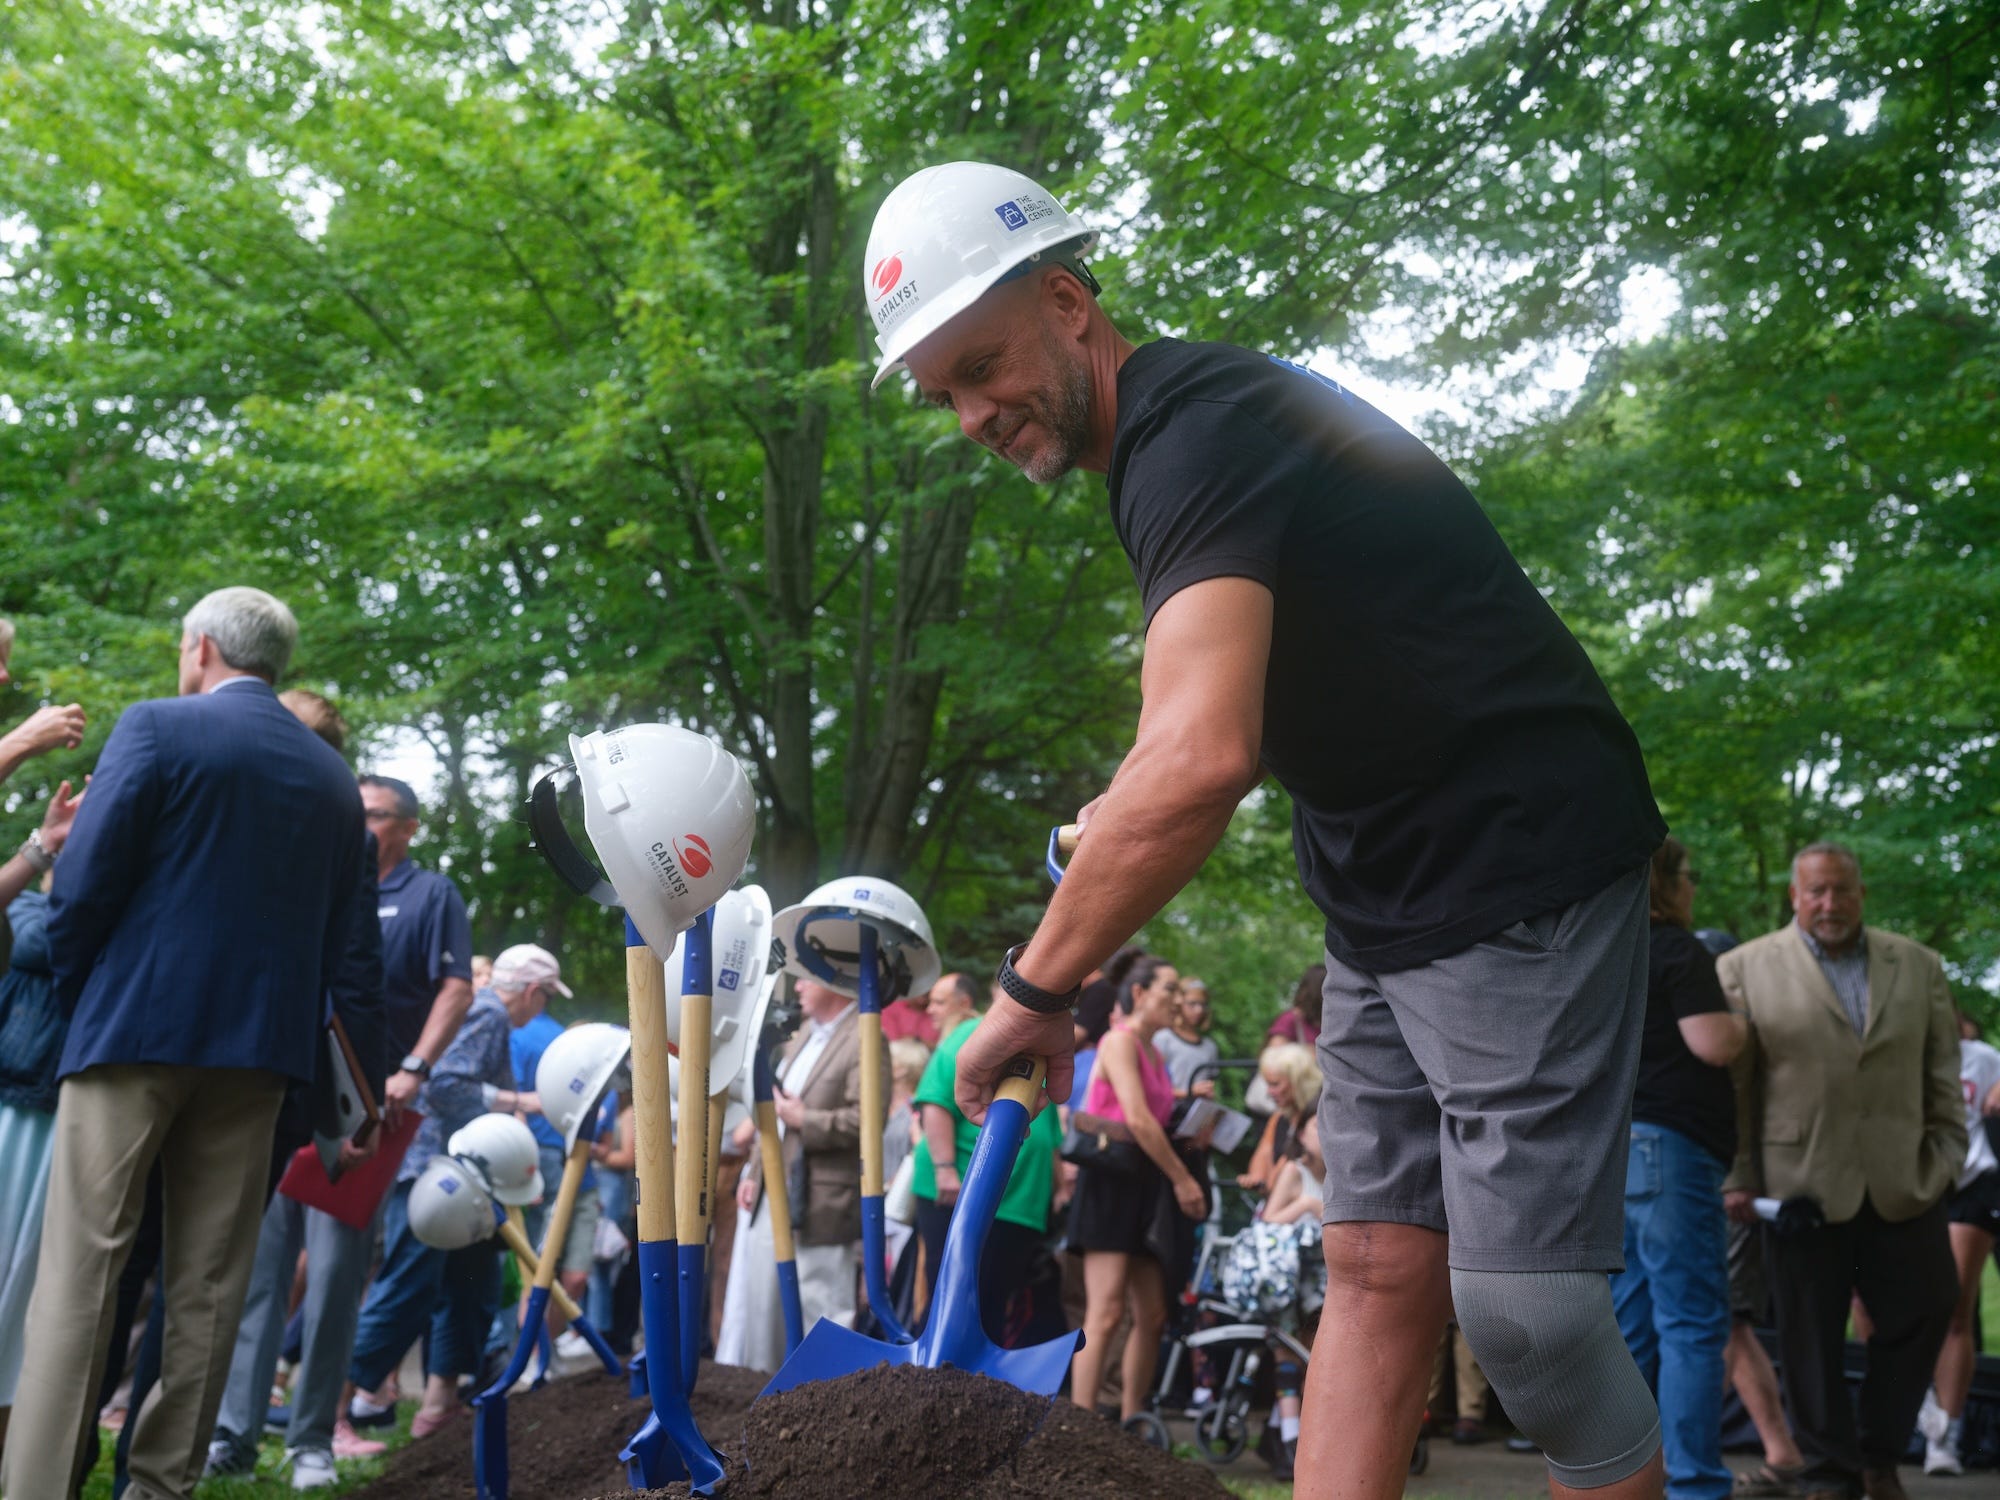 Damian Buchman, founder and CEO of The Ability Center, is the first to turn a shovelful of soil at the groundbreaking of Moss Universal Park in Wauwatosa, Wisconsin.